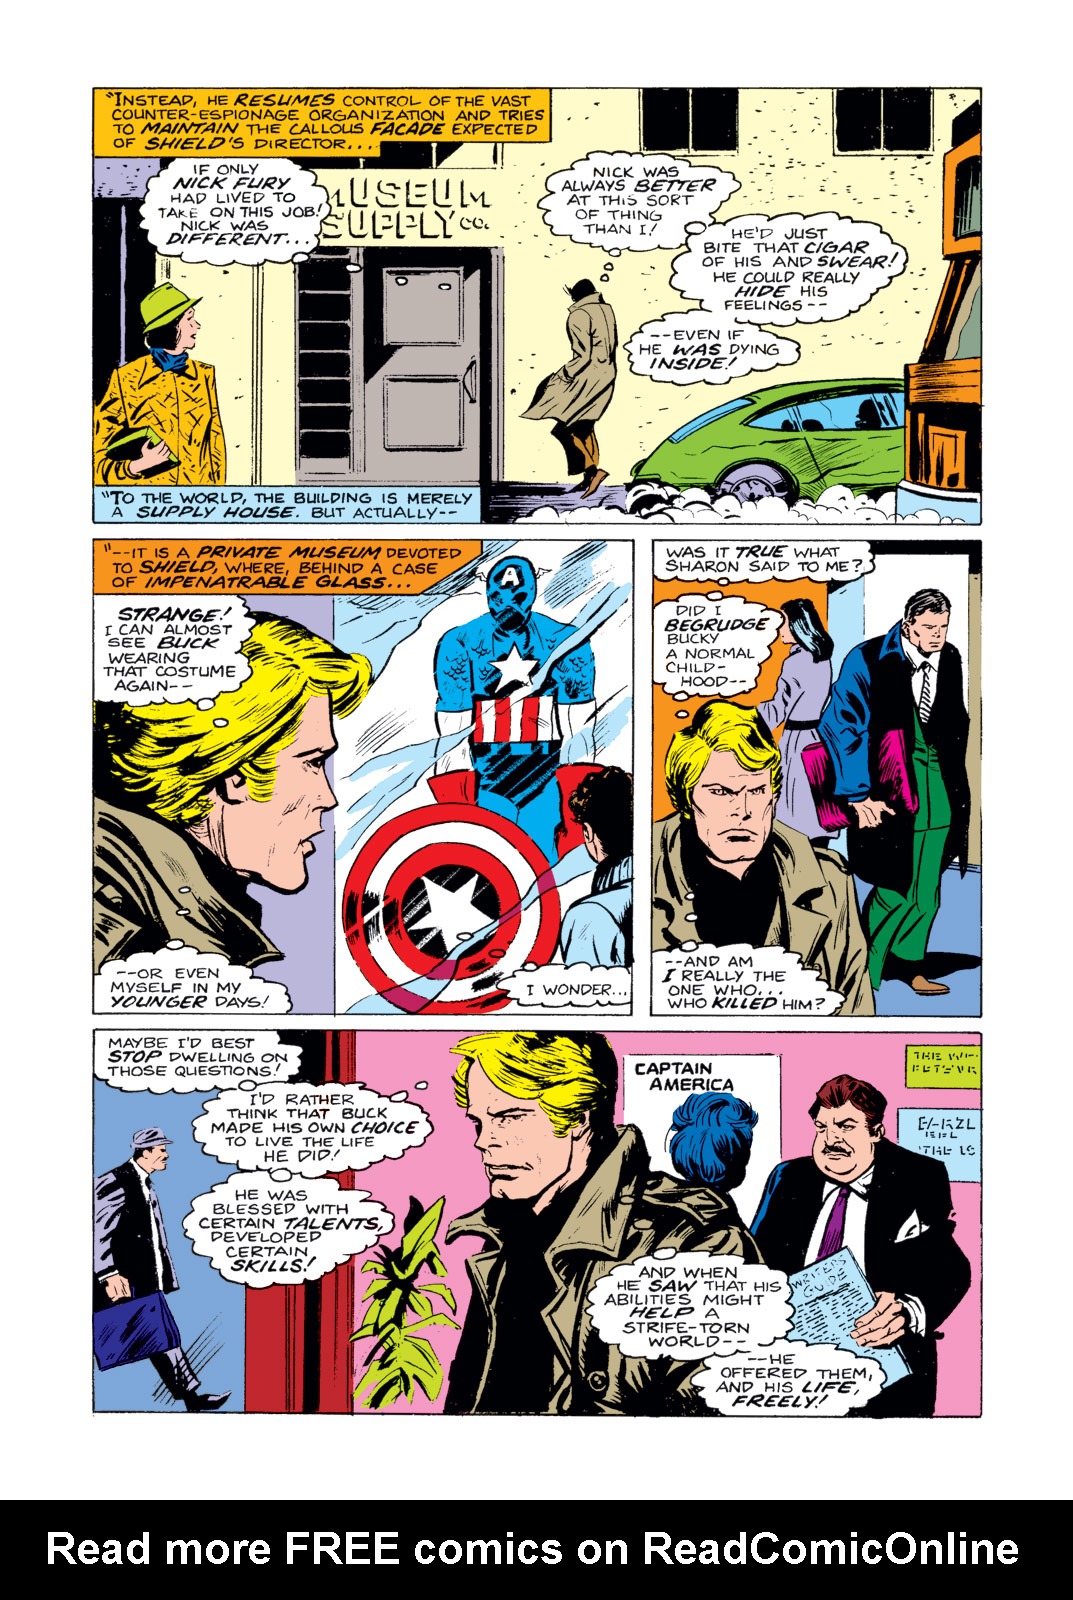 What If? (1977) issue 5 - Captain America hadn't vanished during World War Two - Page 32